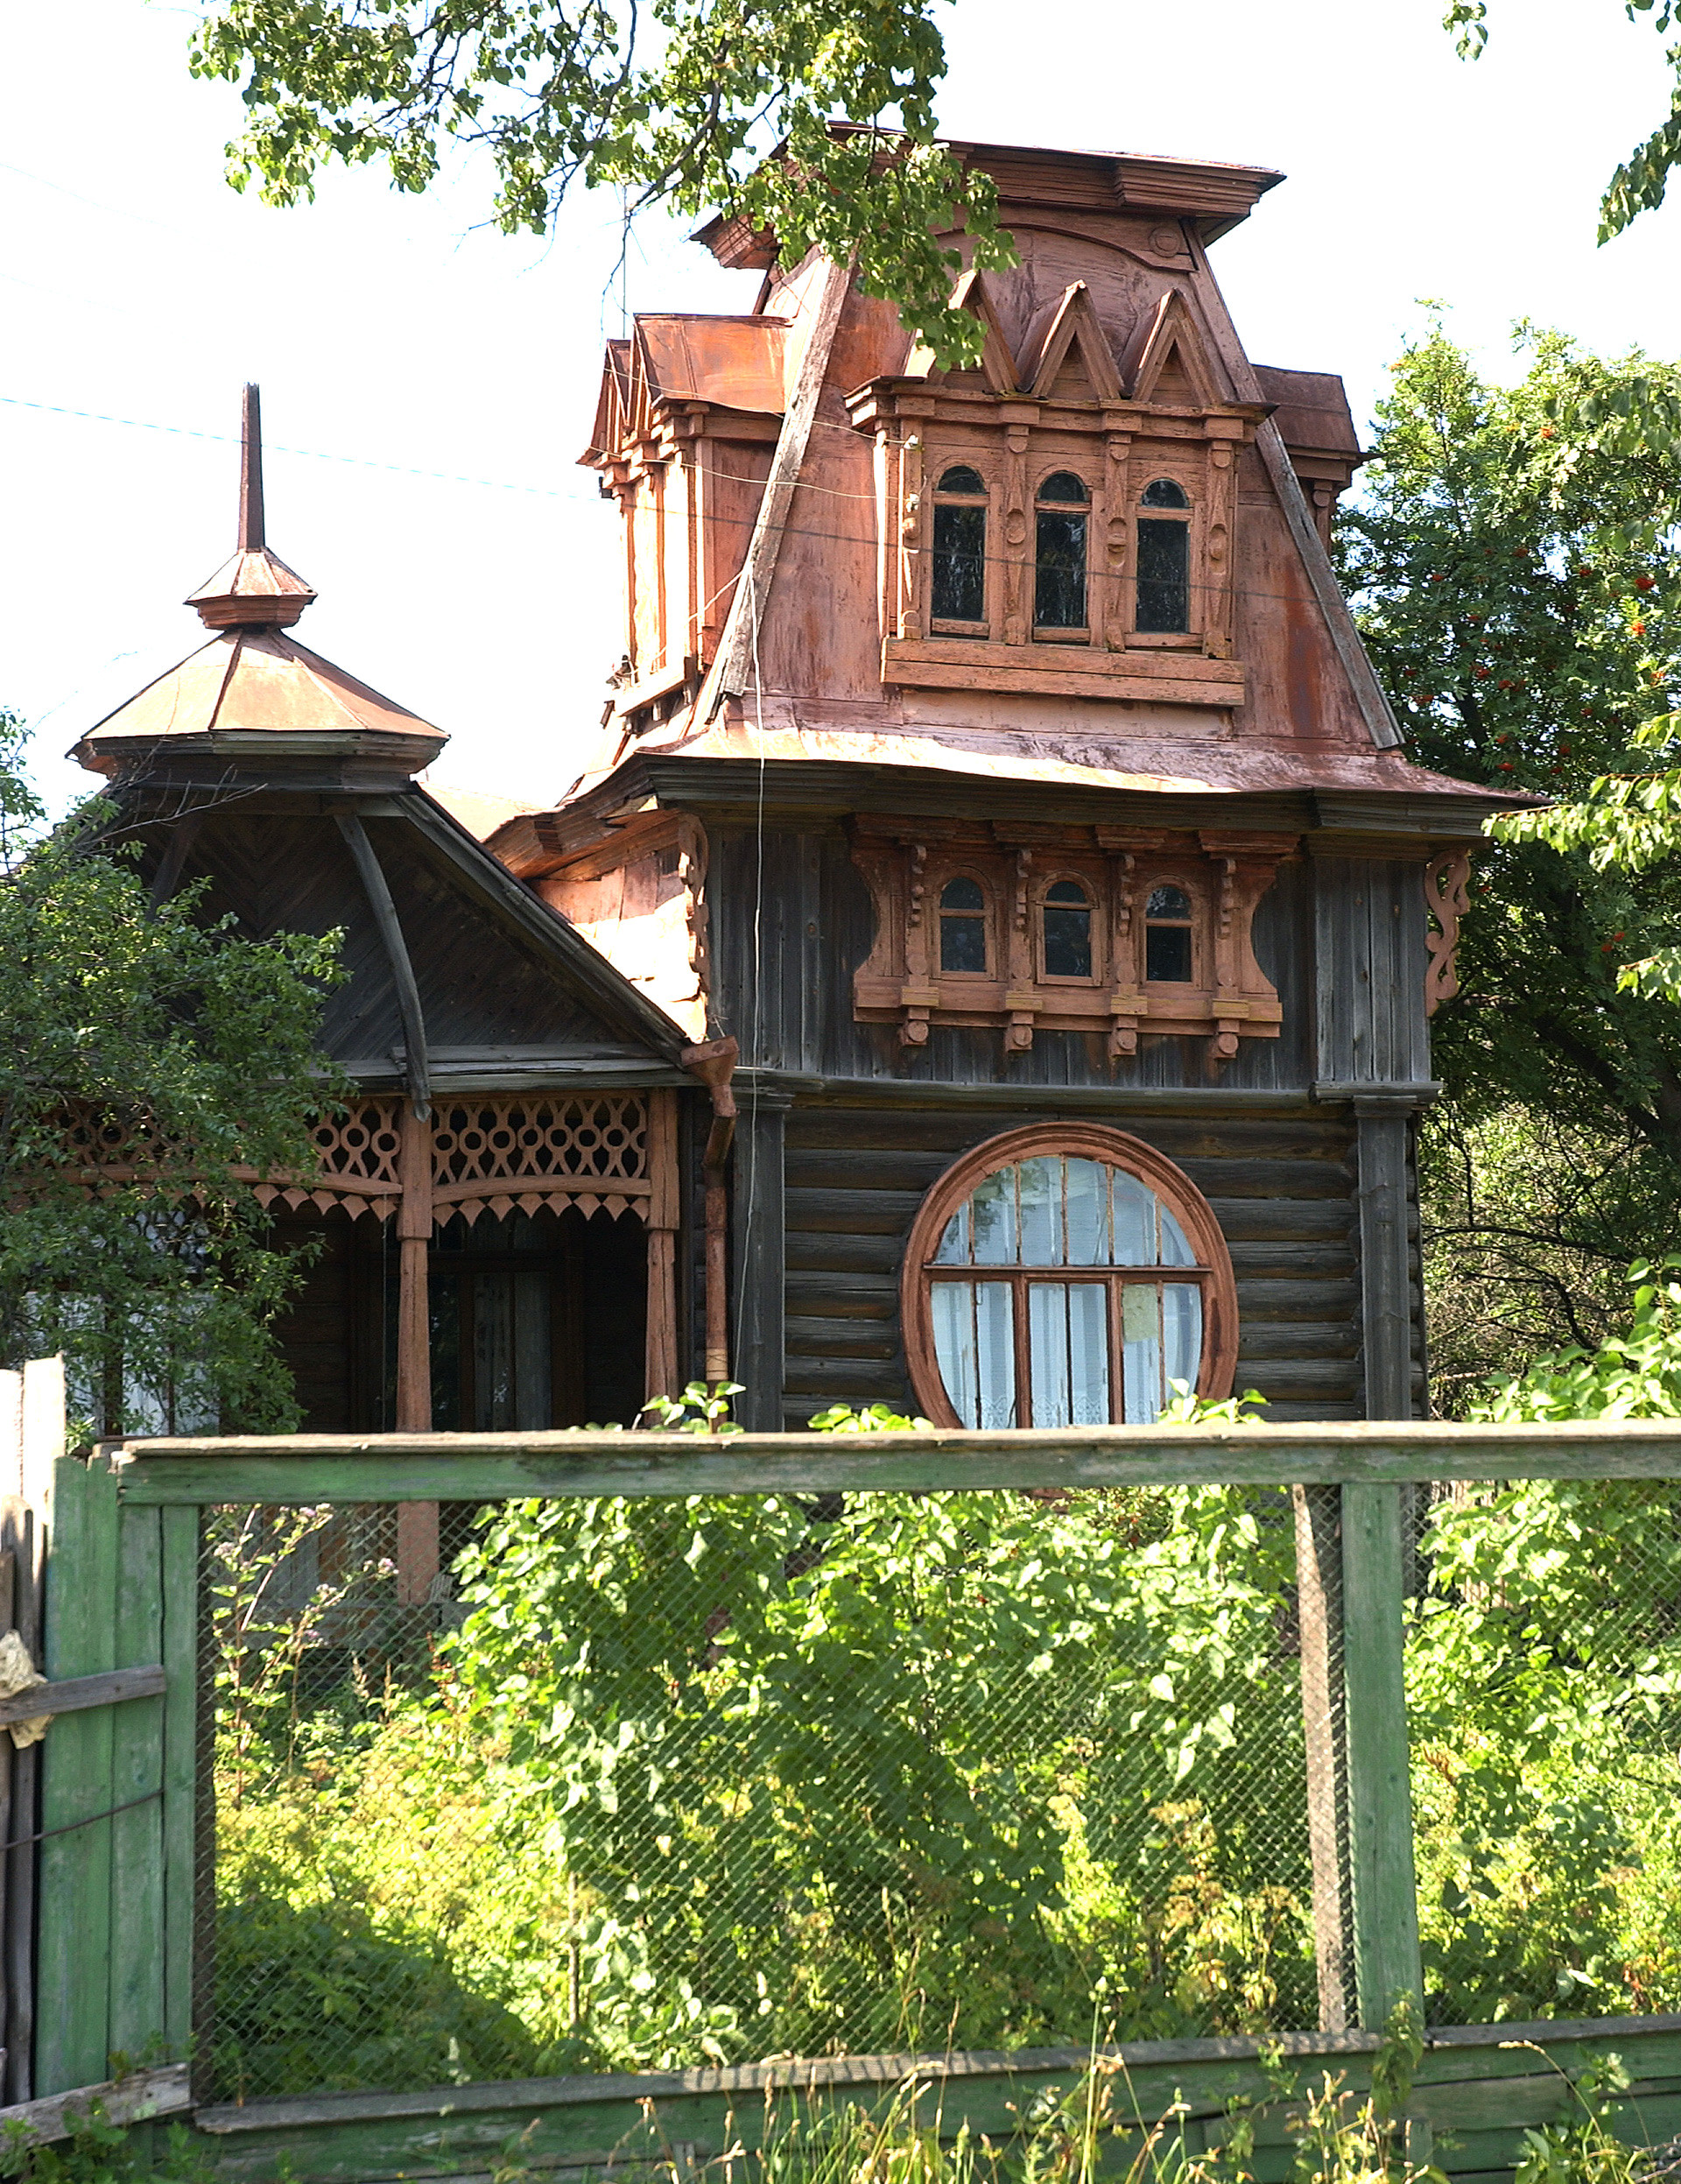 The most popular sights in Kimry are the beautiful and unique Art Nouveau wooden mansions.